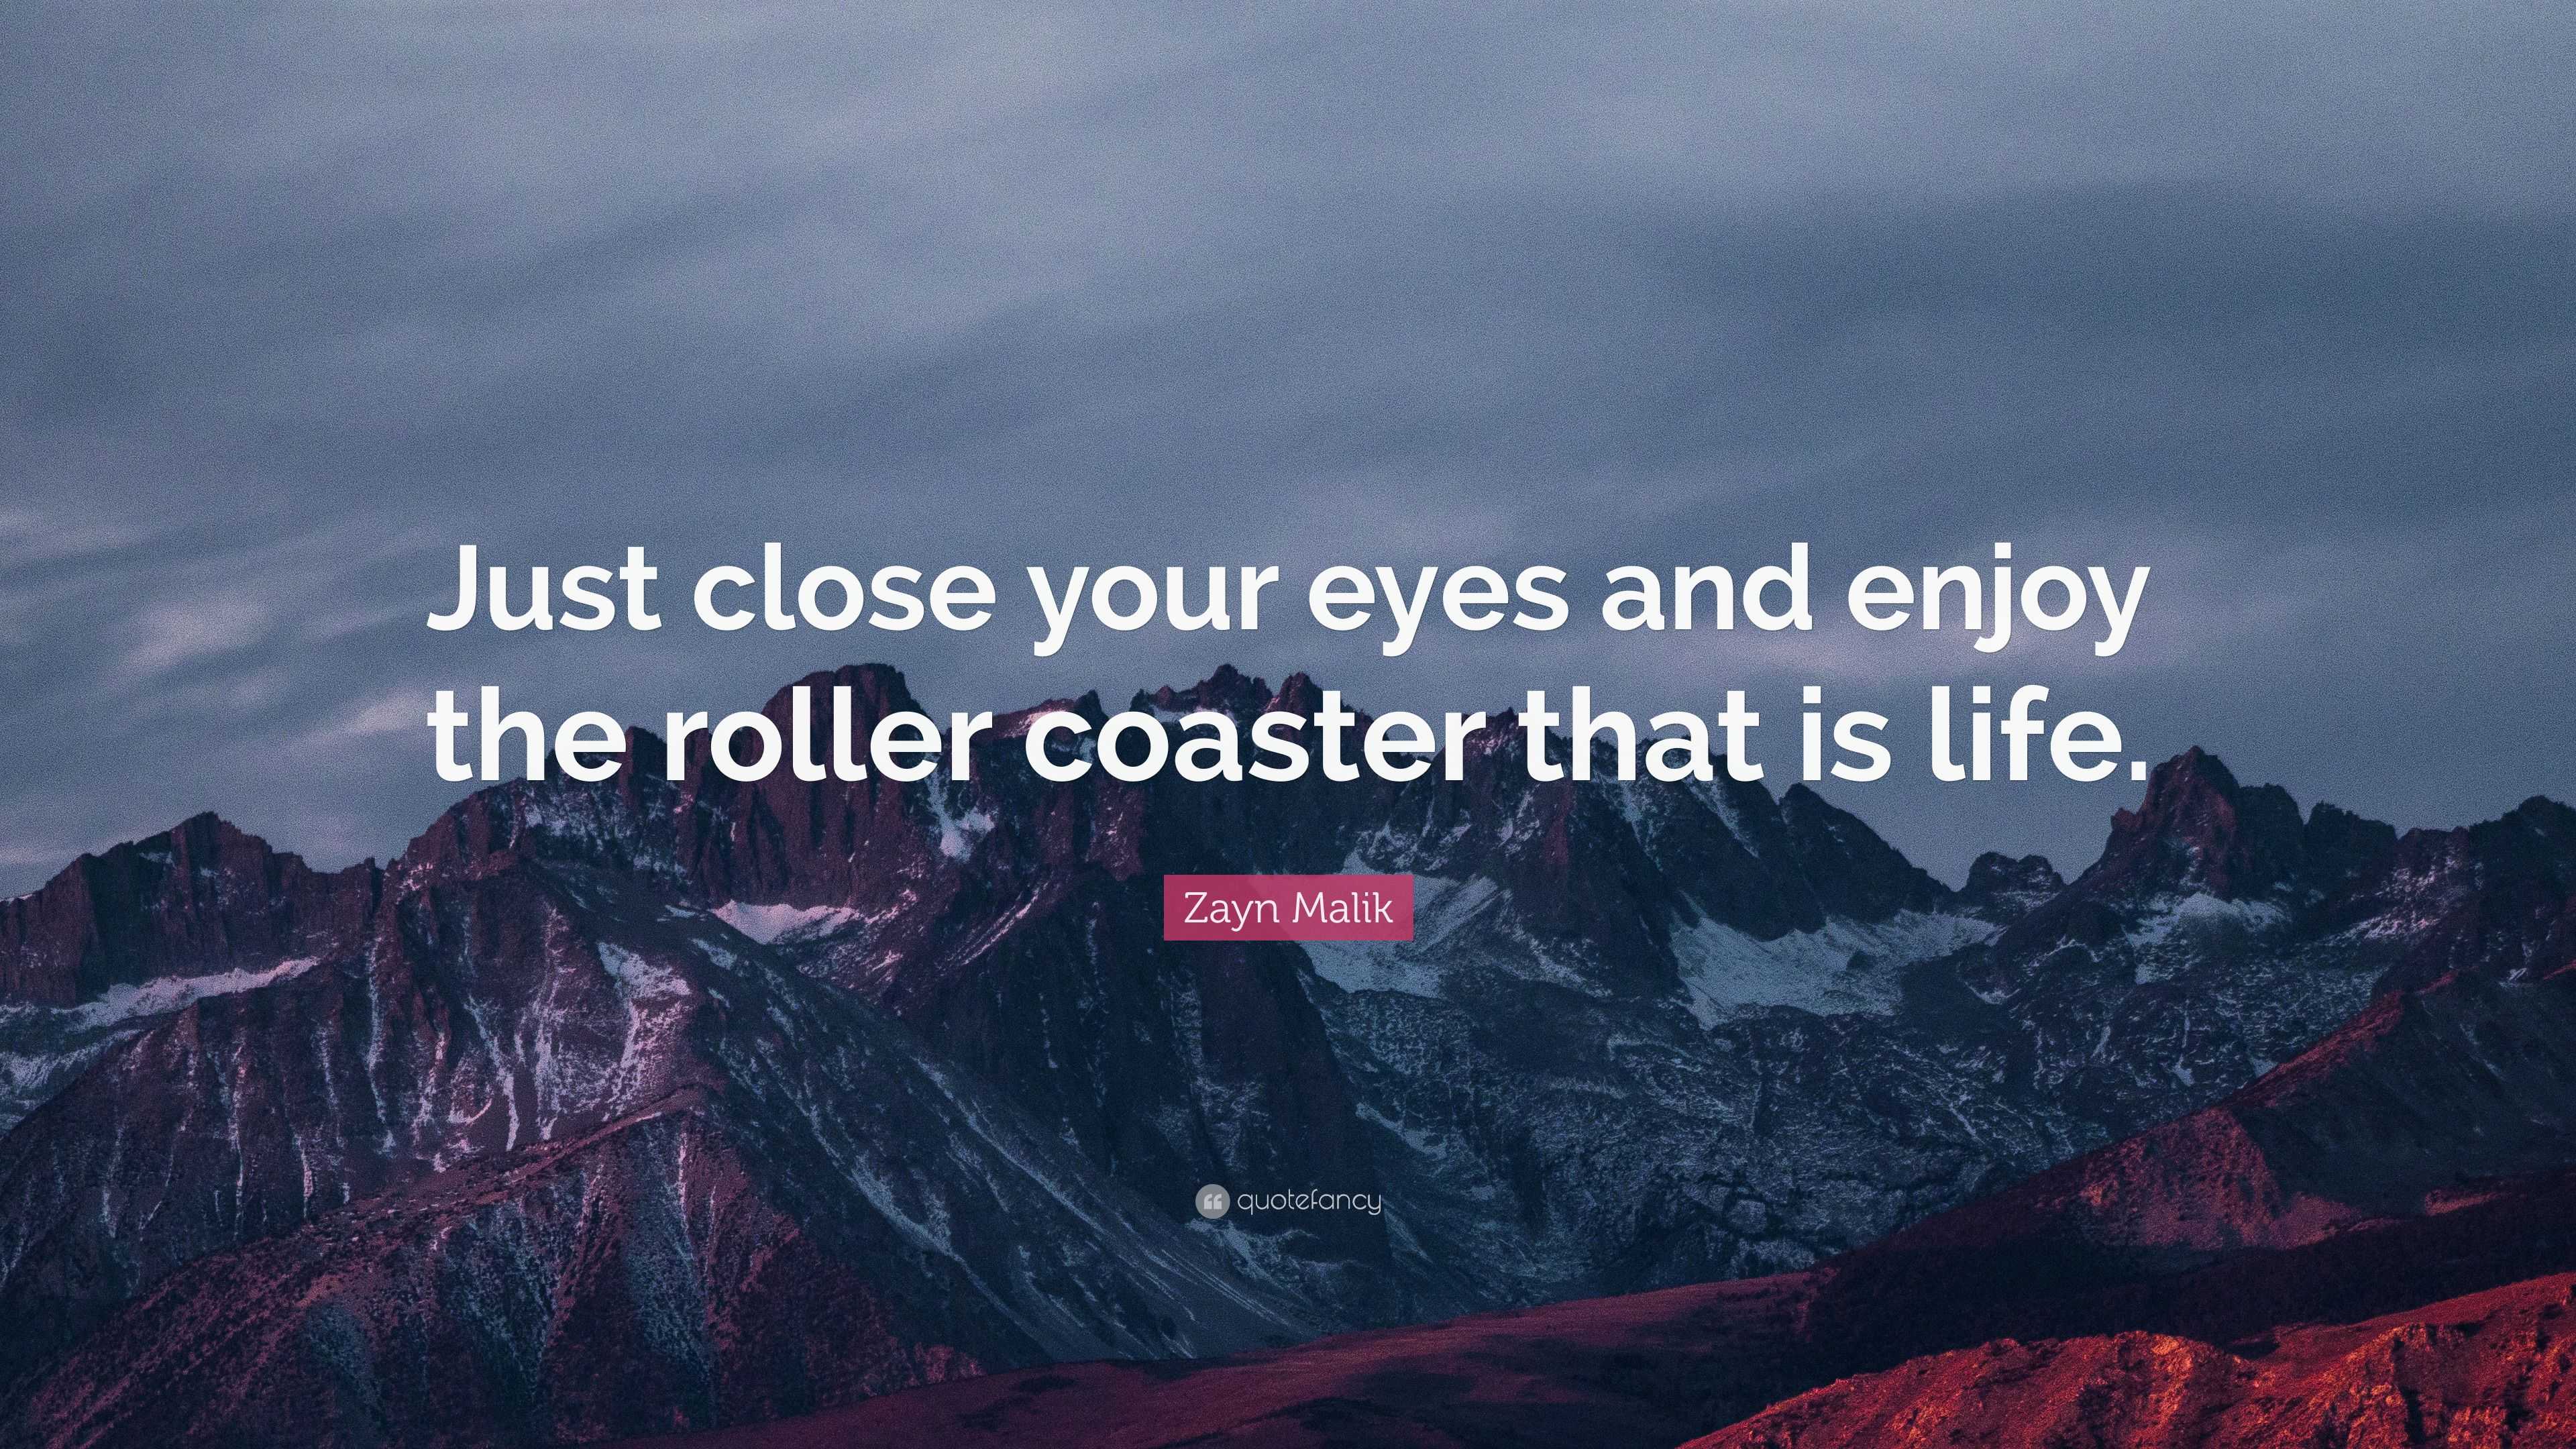 Zayn Malik Quote: “Just close your eyes and enjoy the roller coaster ...